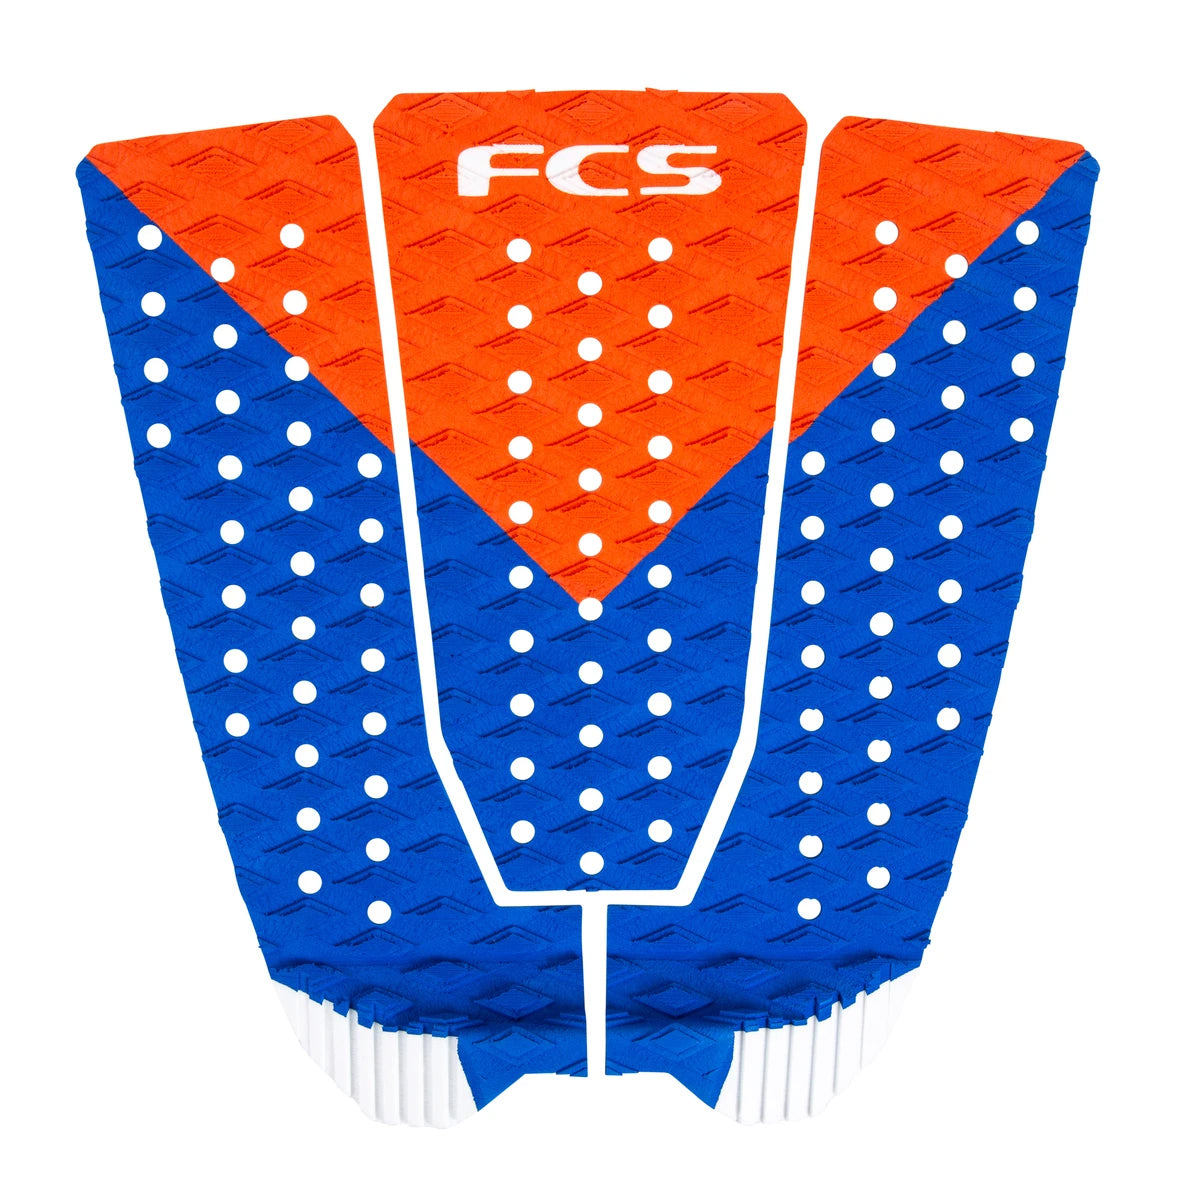 FCS Kolohe Athlete Series Traction Pad Red-White-n-Blue